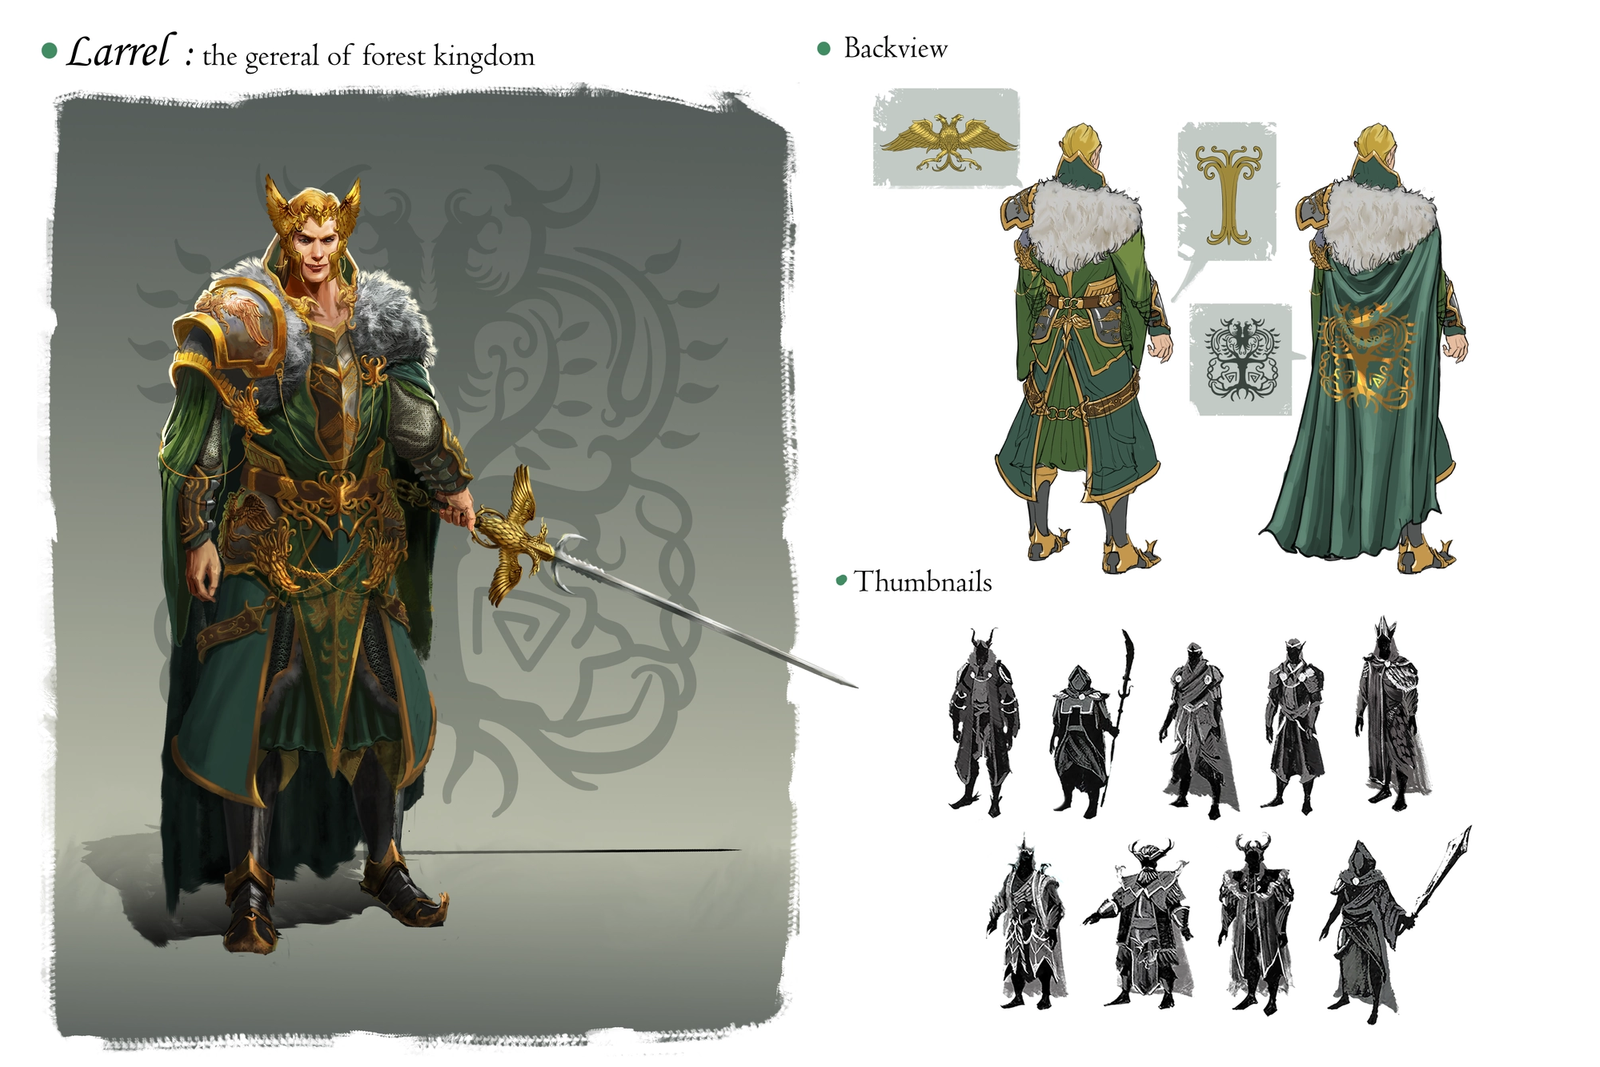 Elven General (1st page)